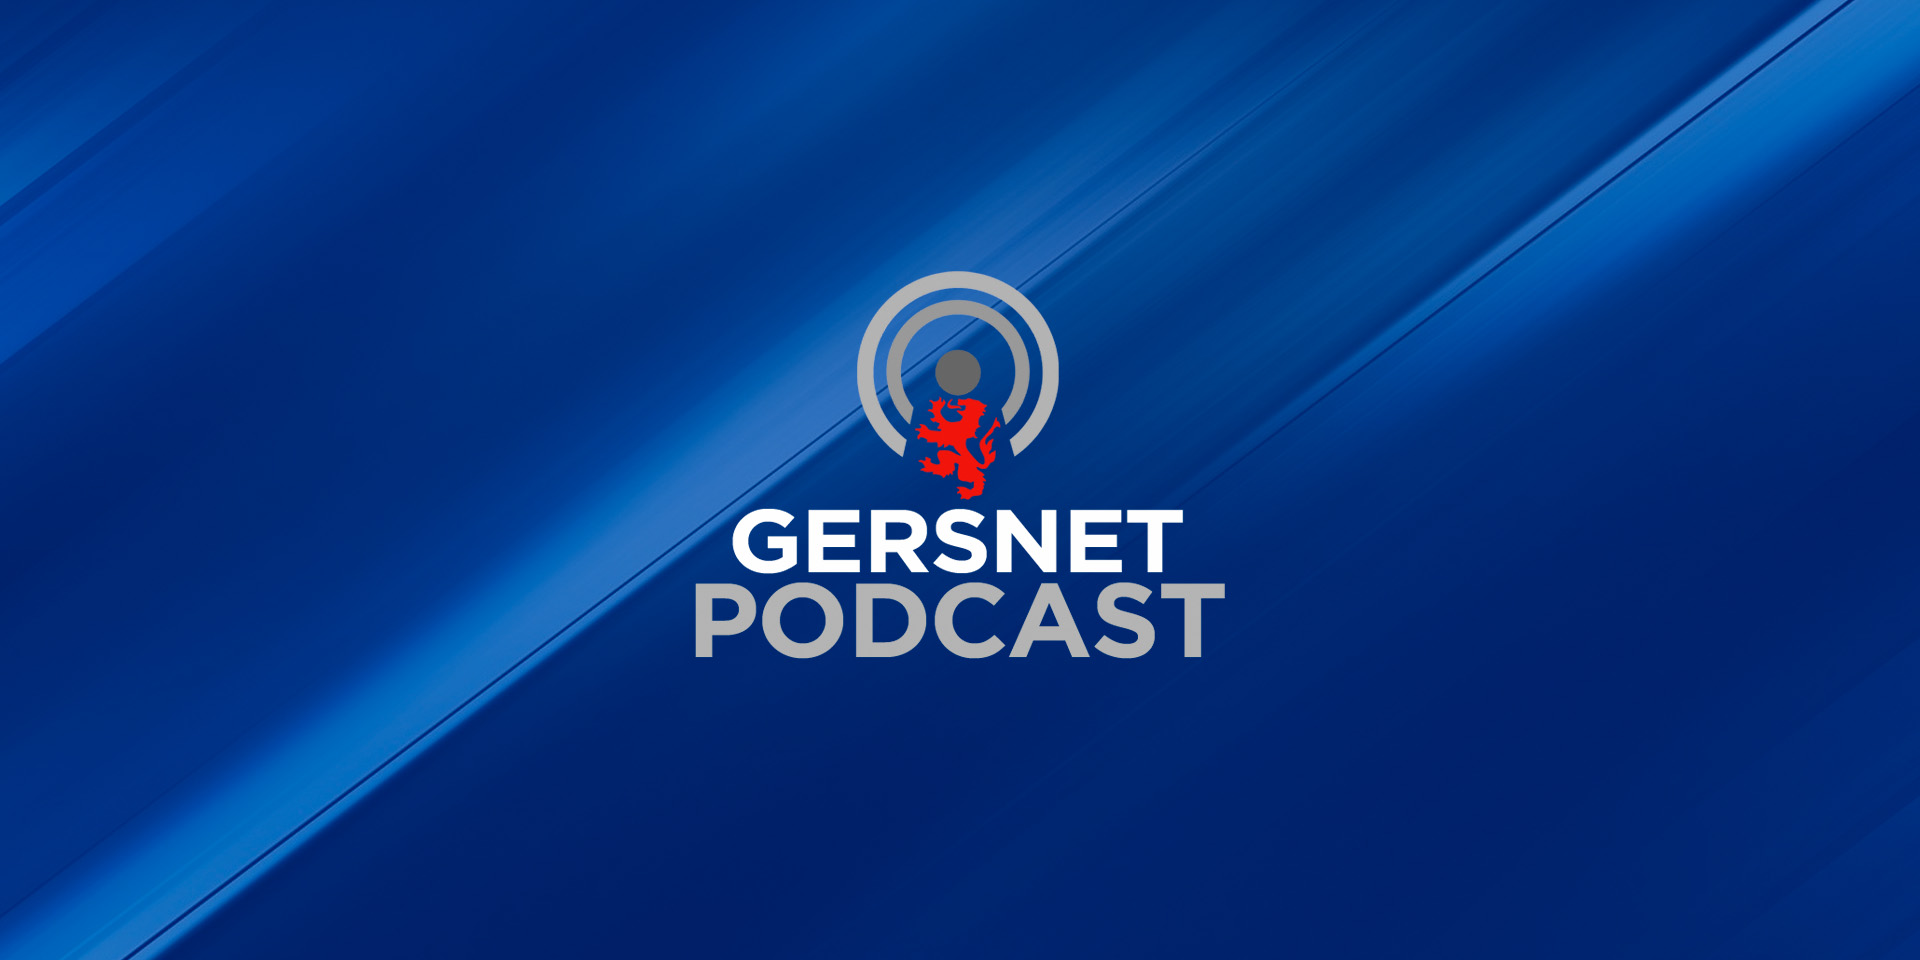 Gersnet Podcast 234 - Ex-Dons Down the Dons